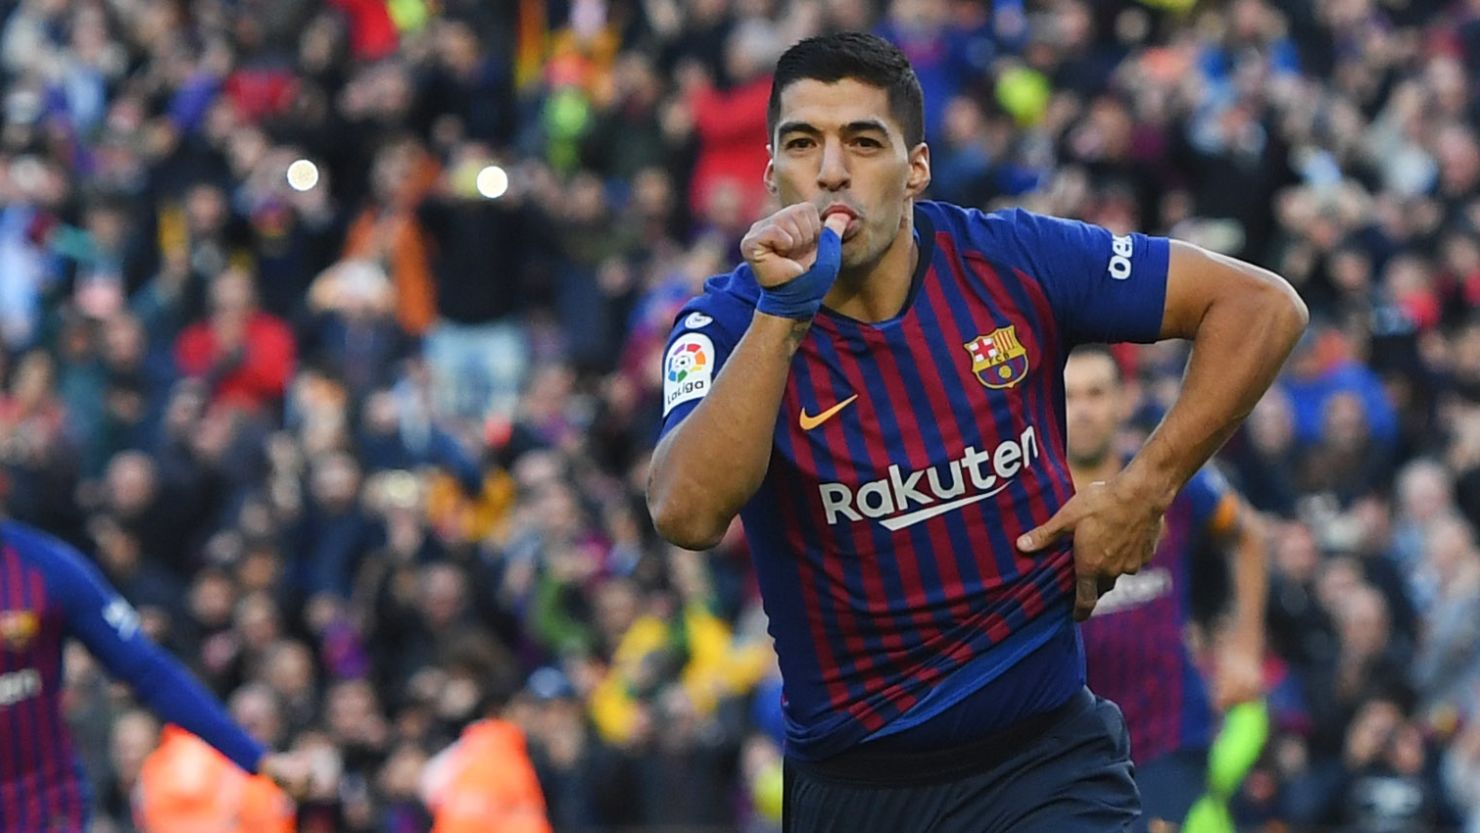 Luis Suarez celebrates scoring the first of his triple for Barcelona in the El Clasico win over Real Madrid in the Nou Camp. 